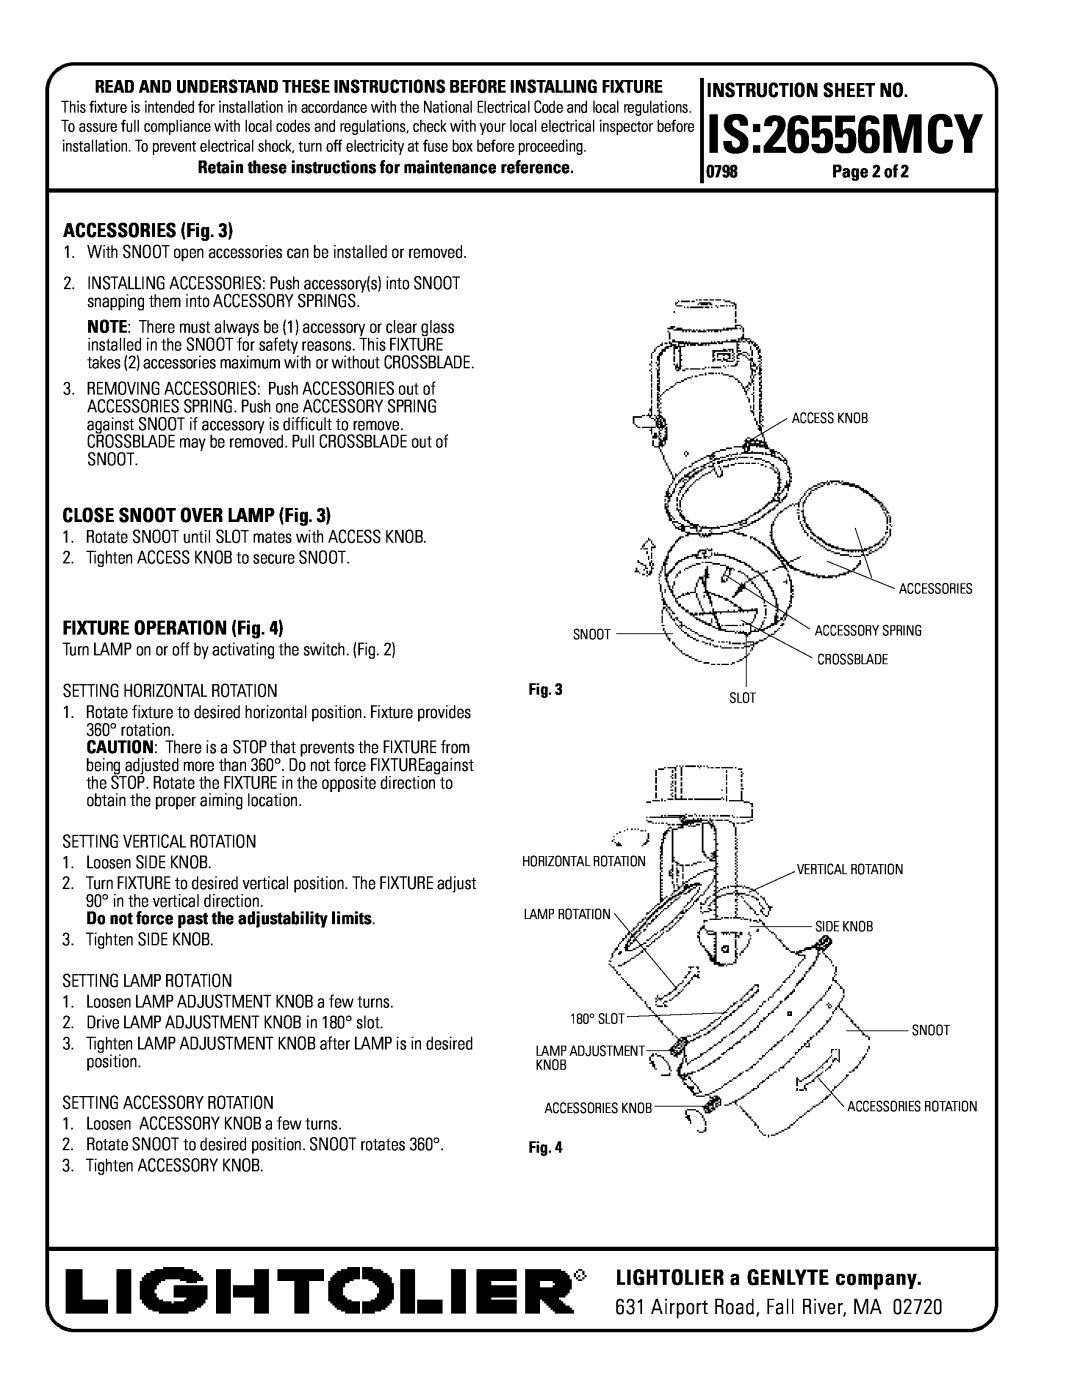 Lightolier IS_26556MCY ACCESSORIES Fig, CLOSE SNOOT OVER LAMP Fig, FIXTURE OPERATION Fig, IS26556MCY, Instruction Sheet No 